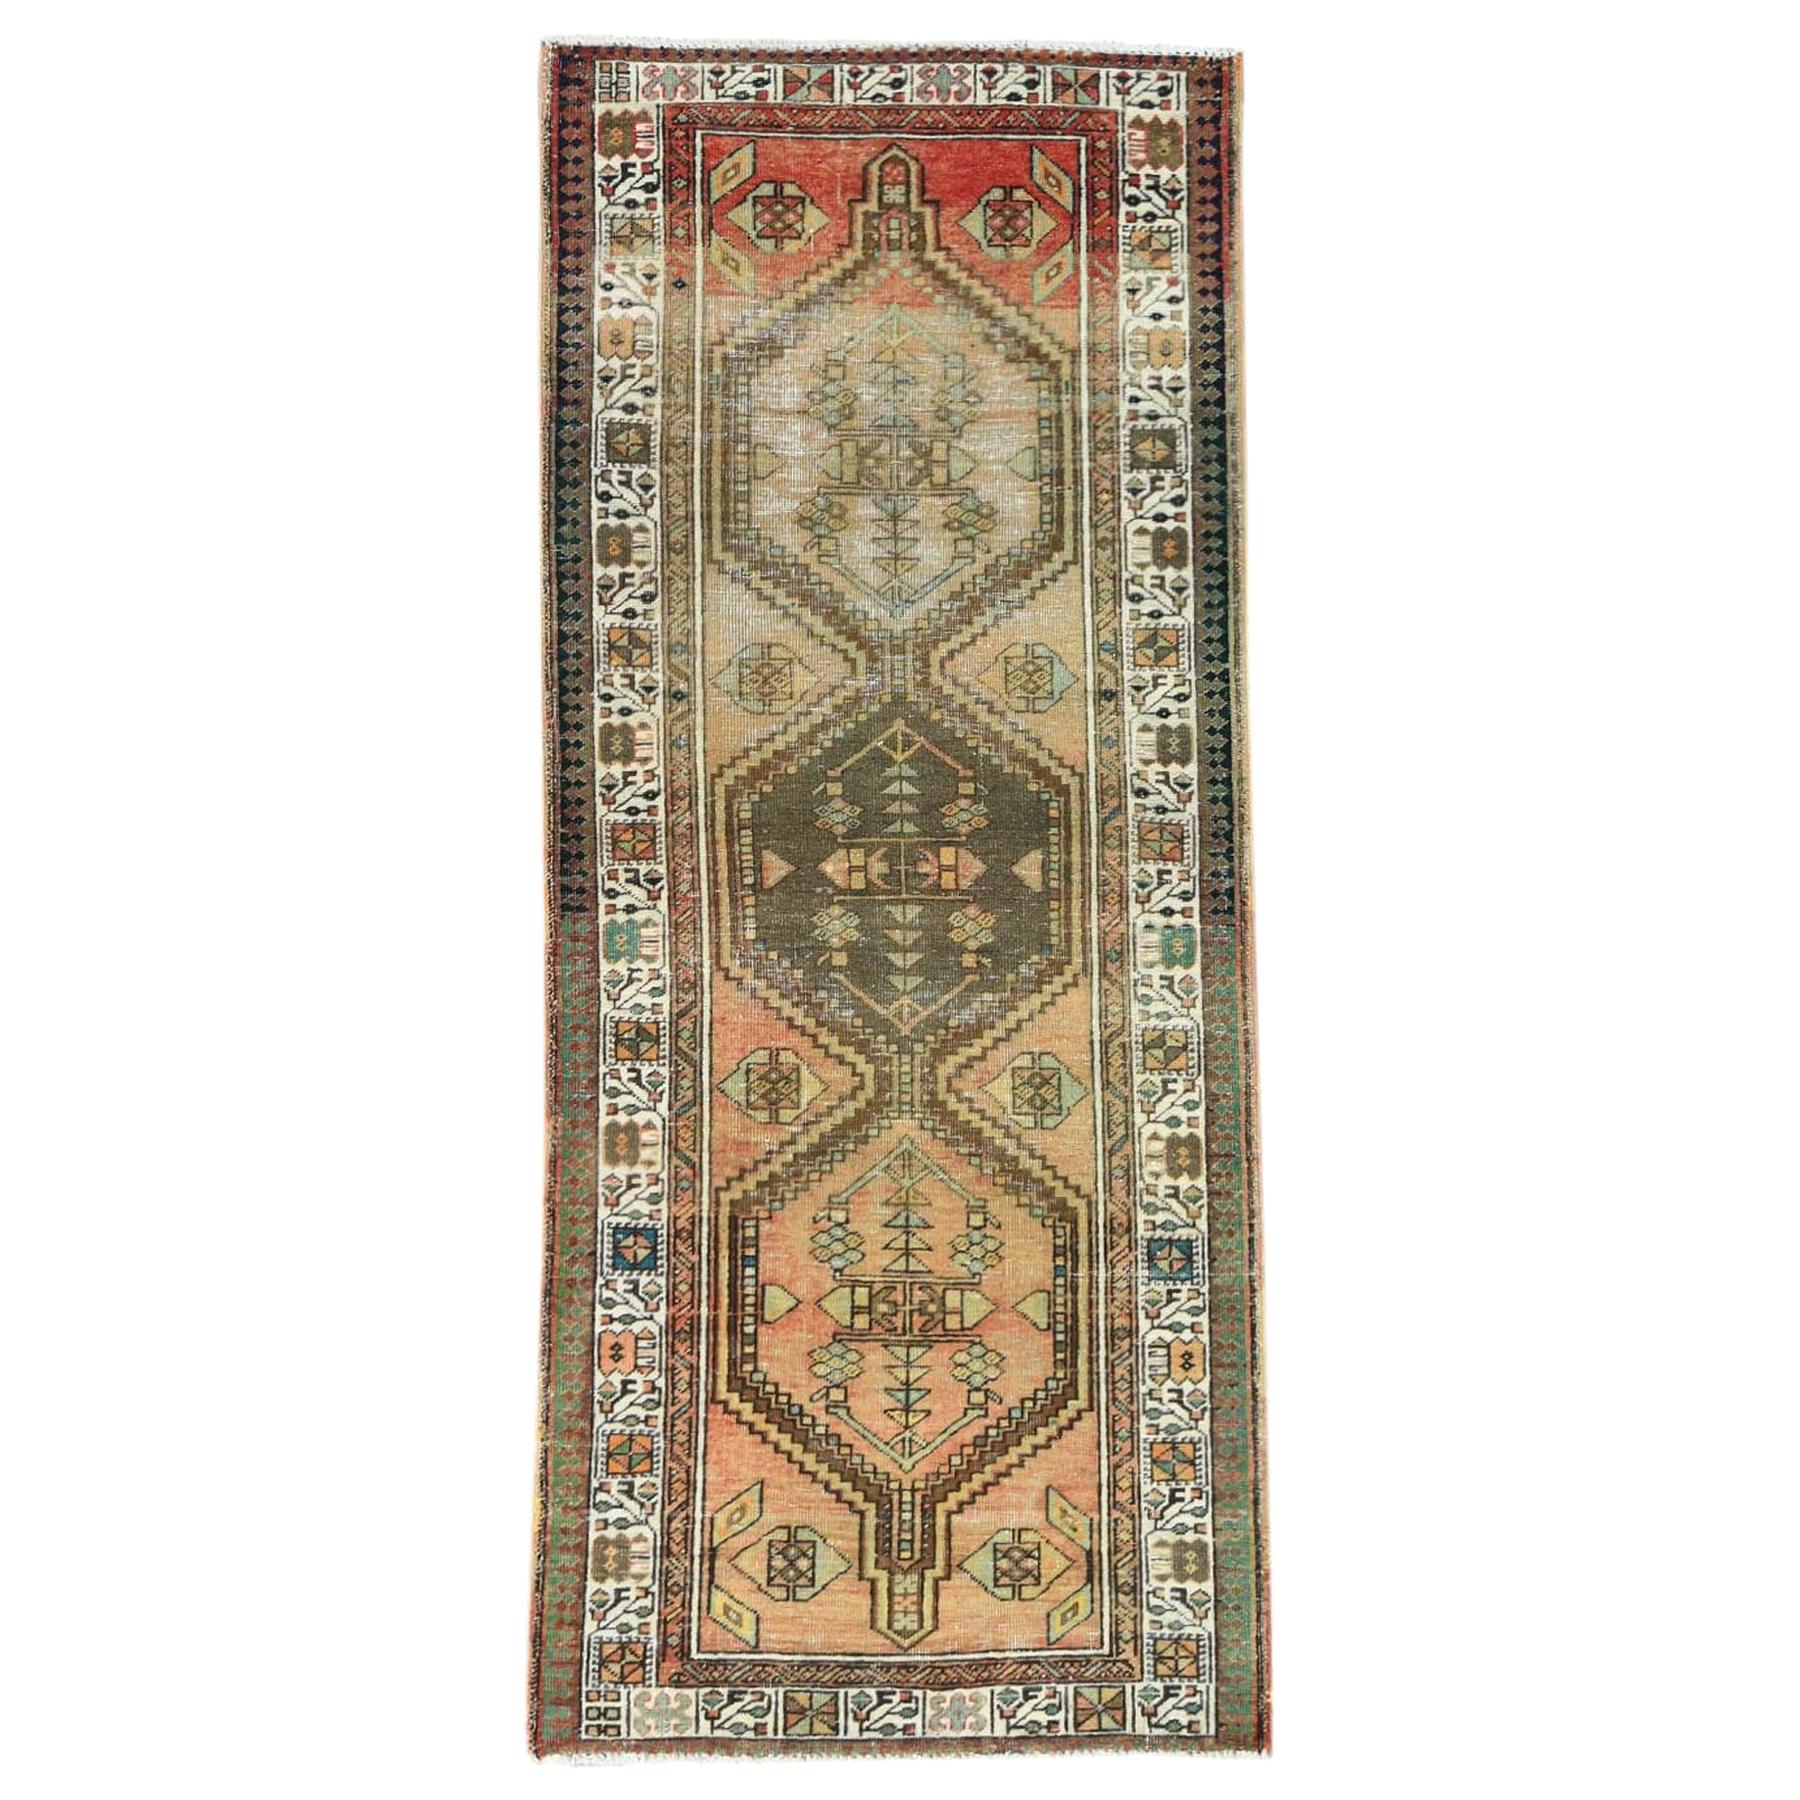 This fabulous hand-knotted carpet has been created and designed for extra strength and durability. This rug has been handcrafted for weeks in the traditional method that is used to make Rugs. This is truly a one-of-kind piece.

Exact rug size in